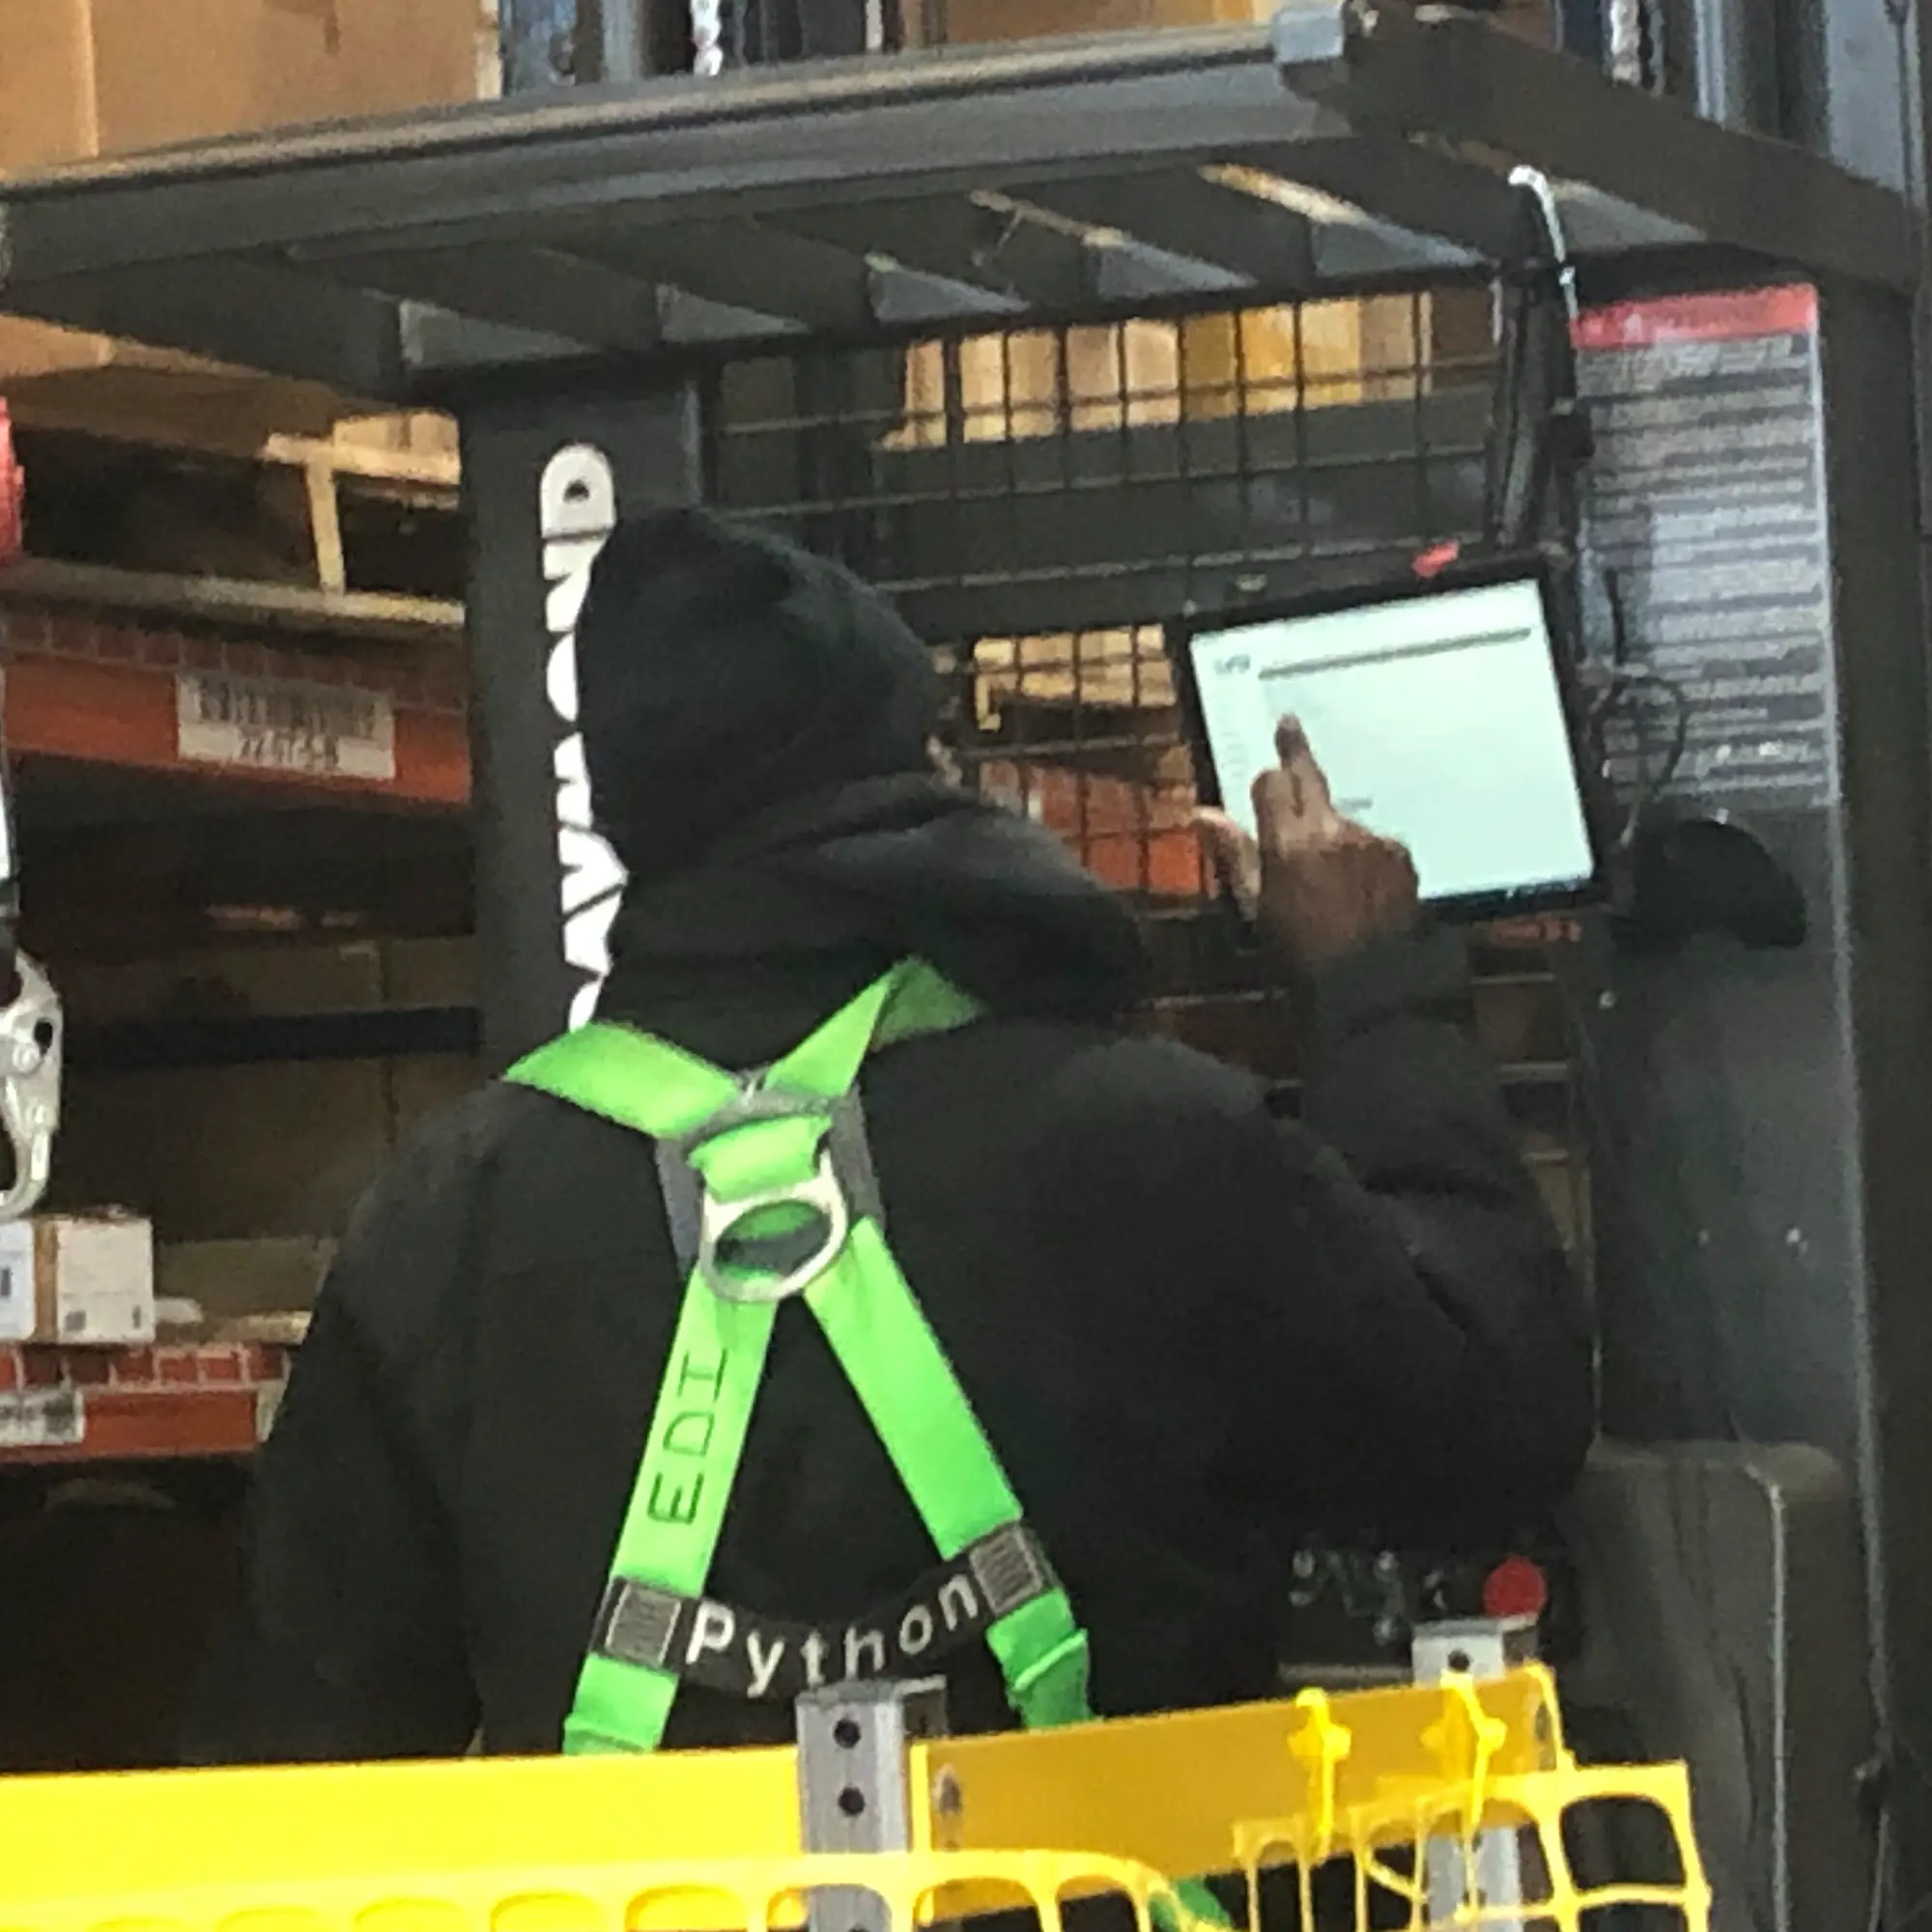 A person wearing a bright green safety harness operates a forklift equipped with a touchscreen interface in the bustling fulfillment warehouse.